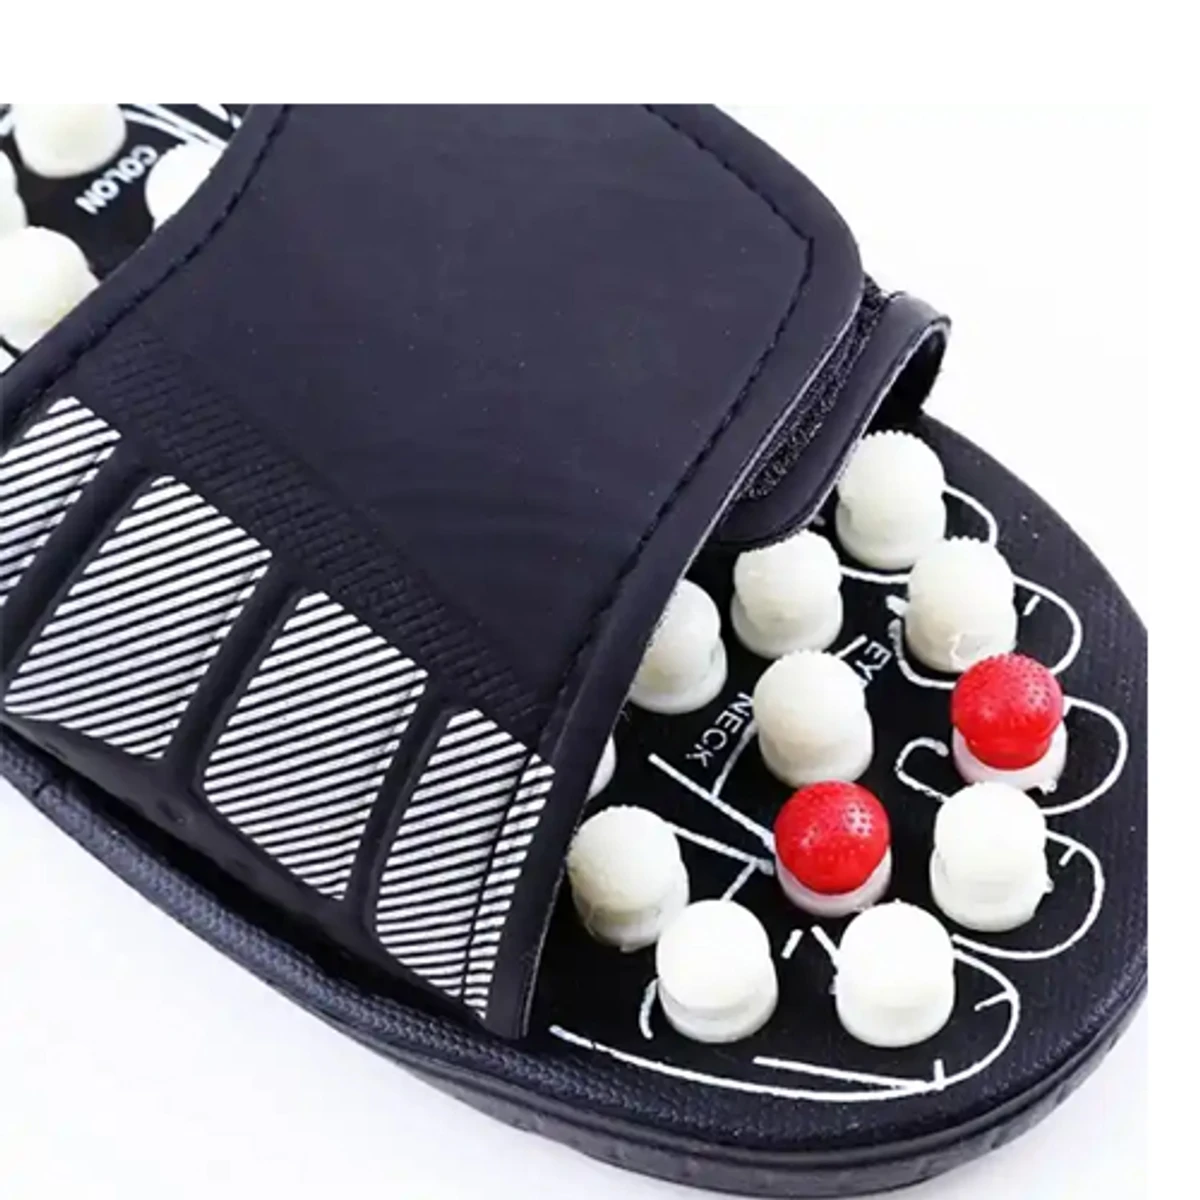 Acupuncture Massage Slippers Shoe Foot Massager